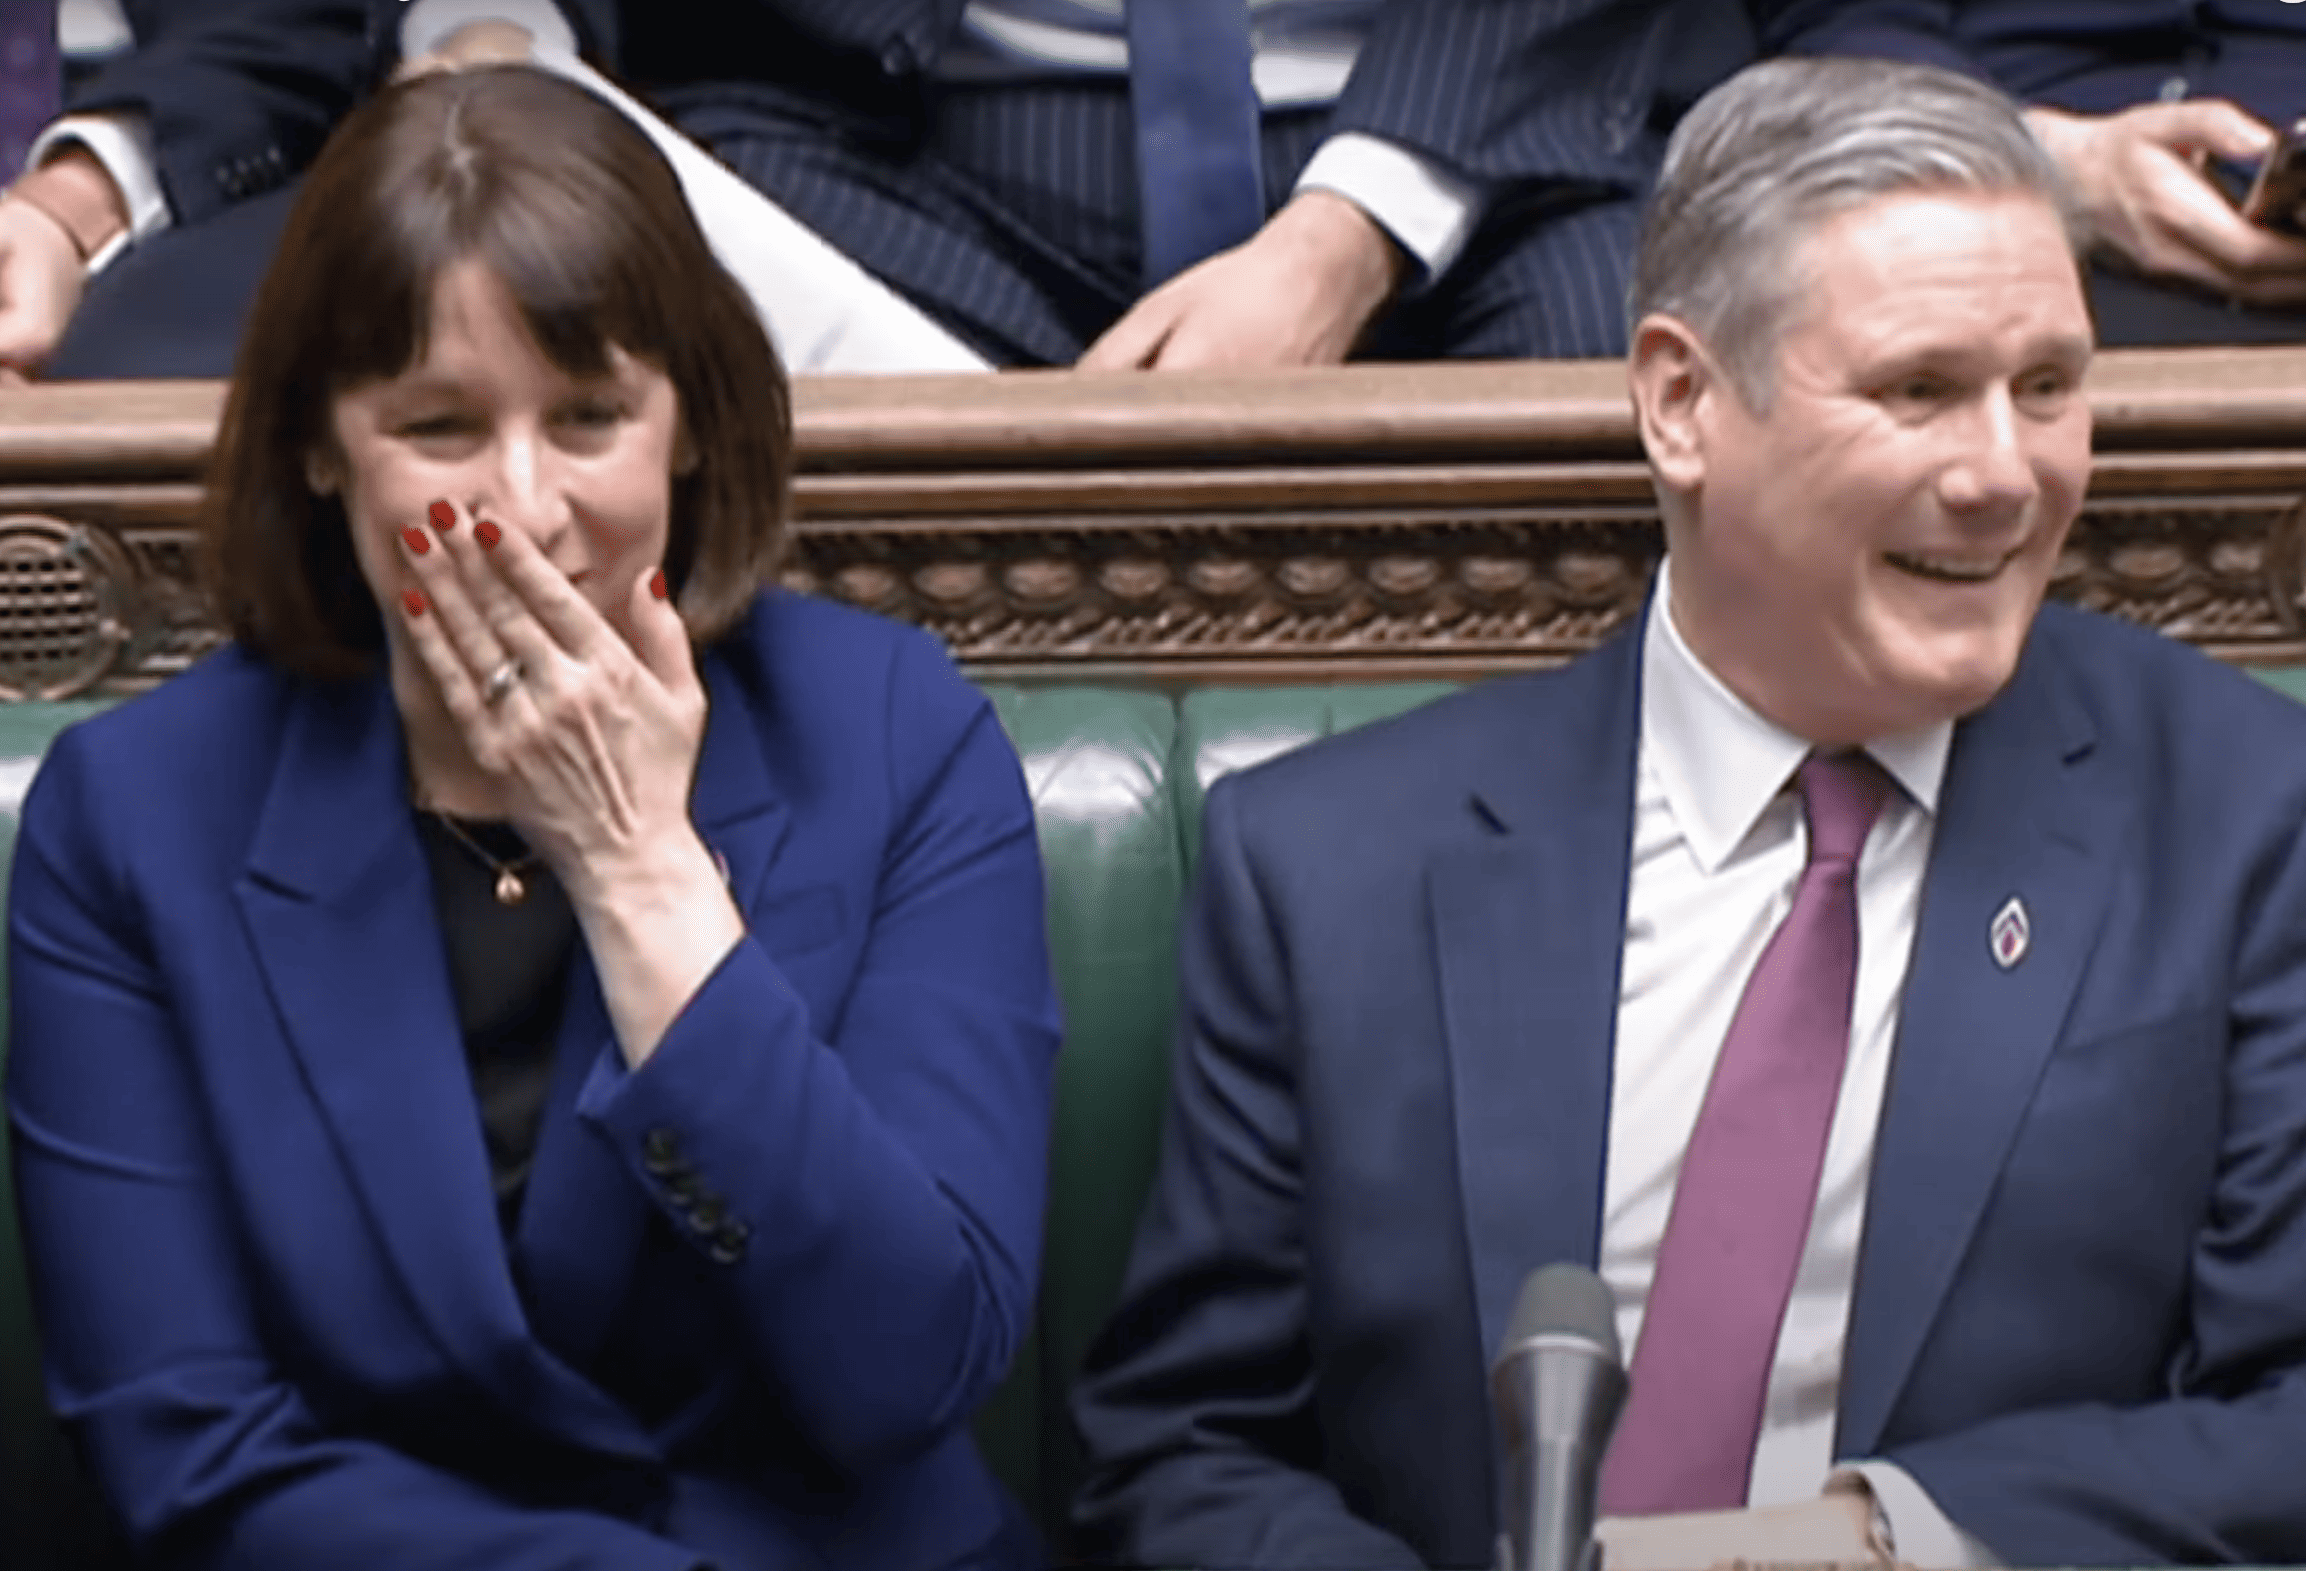 Watch: The moment Commons erupts in laughter after Sunak says ‘things are improving’